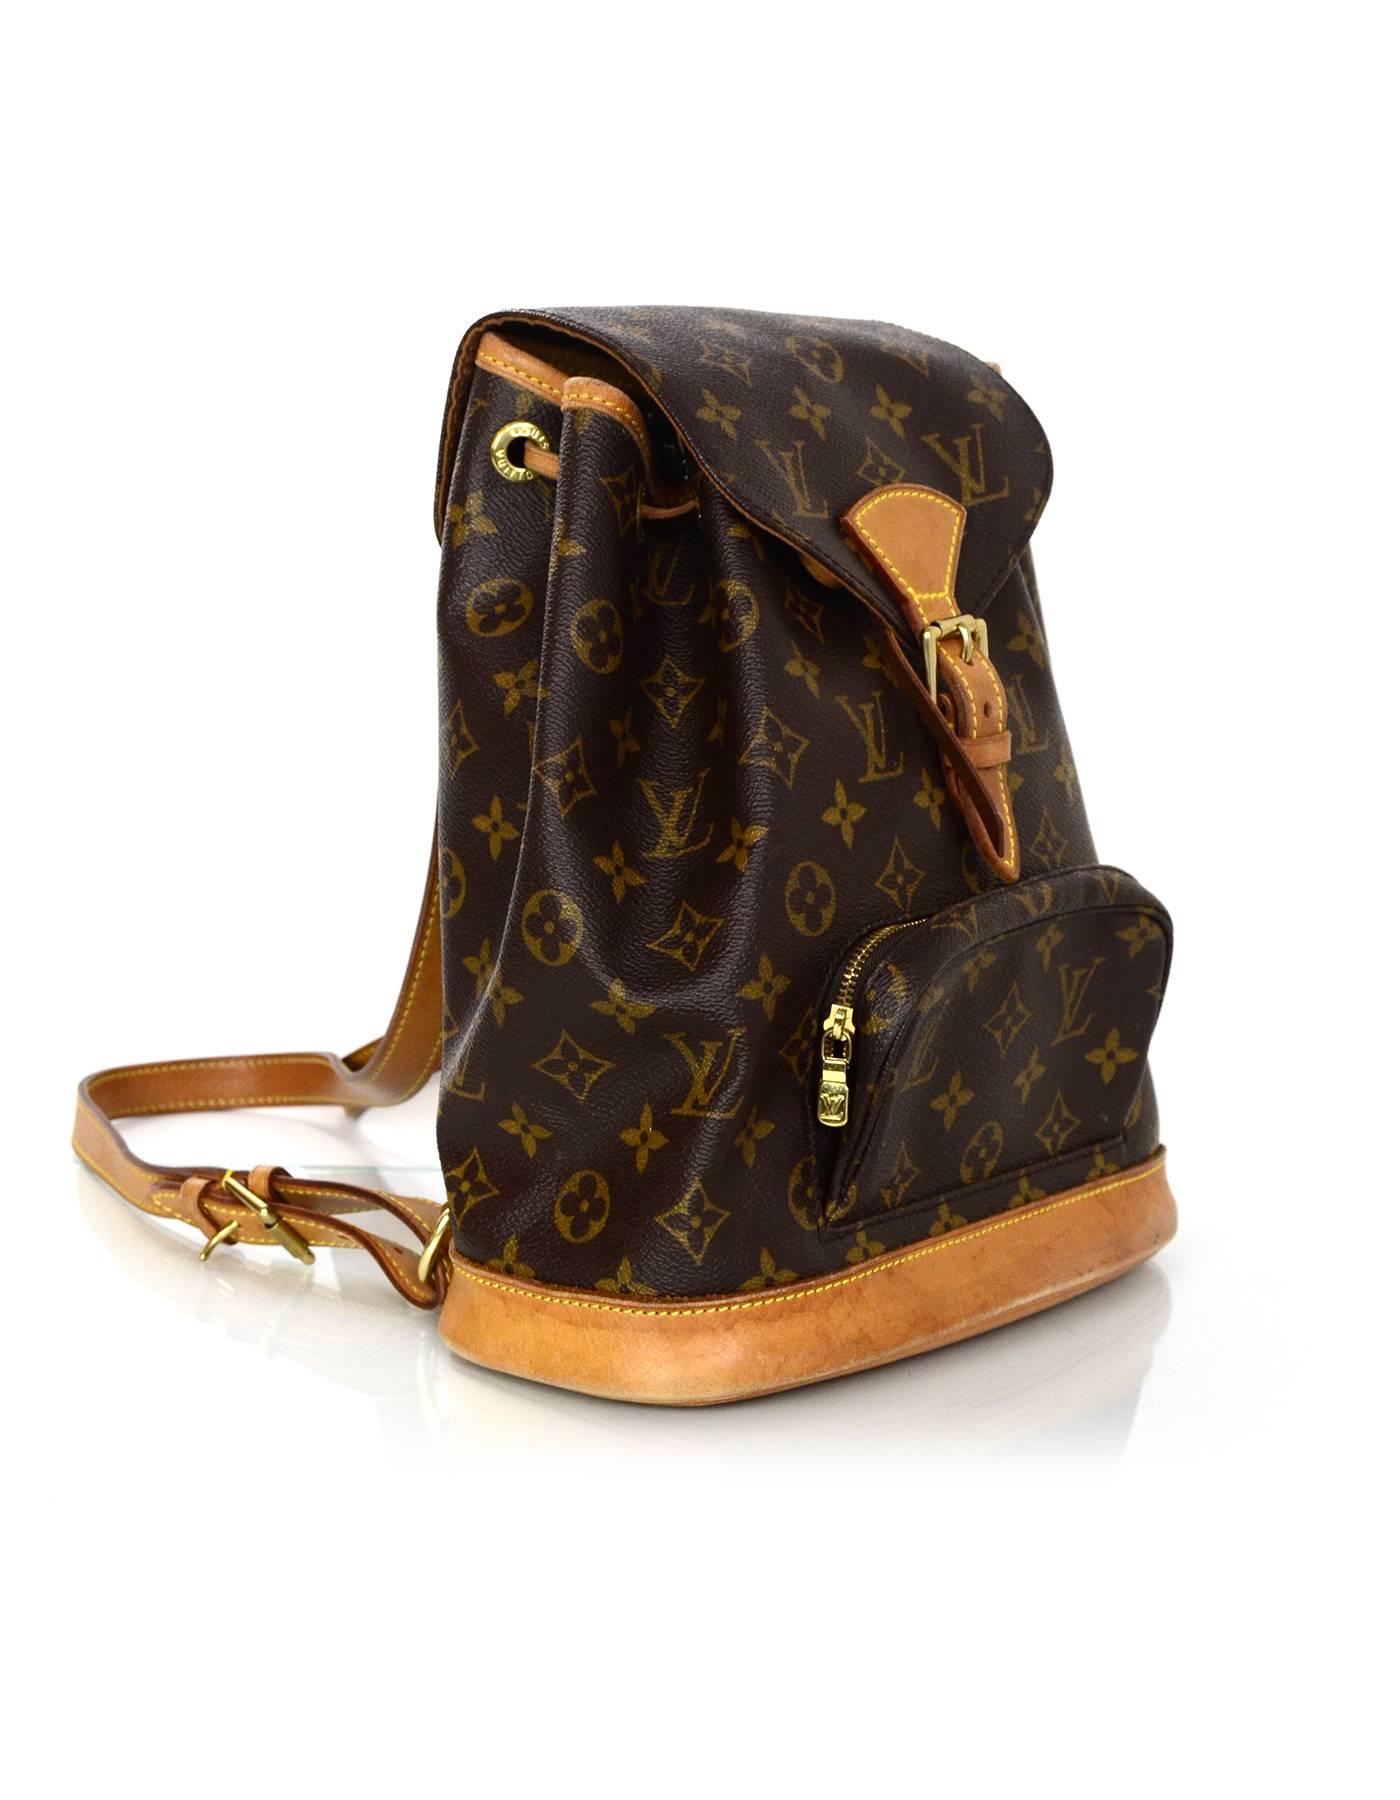 Louis Vuitton Monogram Montsouris MM Backpack
Features leather trim throughout and adjustable shoulder straps

Made In: France
Year of Production: 1997
Color: Brown
Hardware: Goldtone
Materials: Leather and coated canvas
Lining: Brown